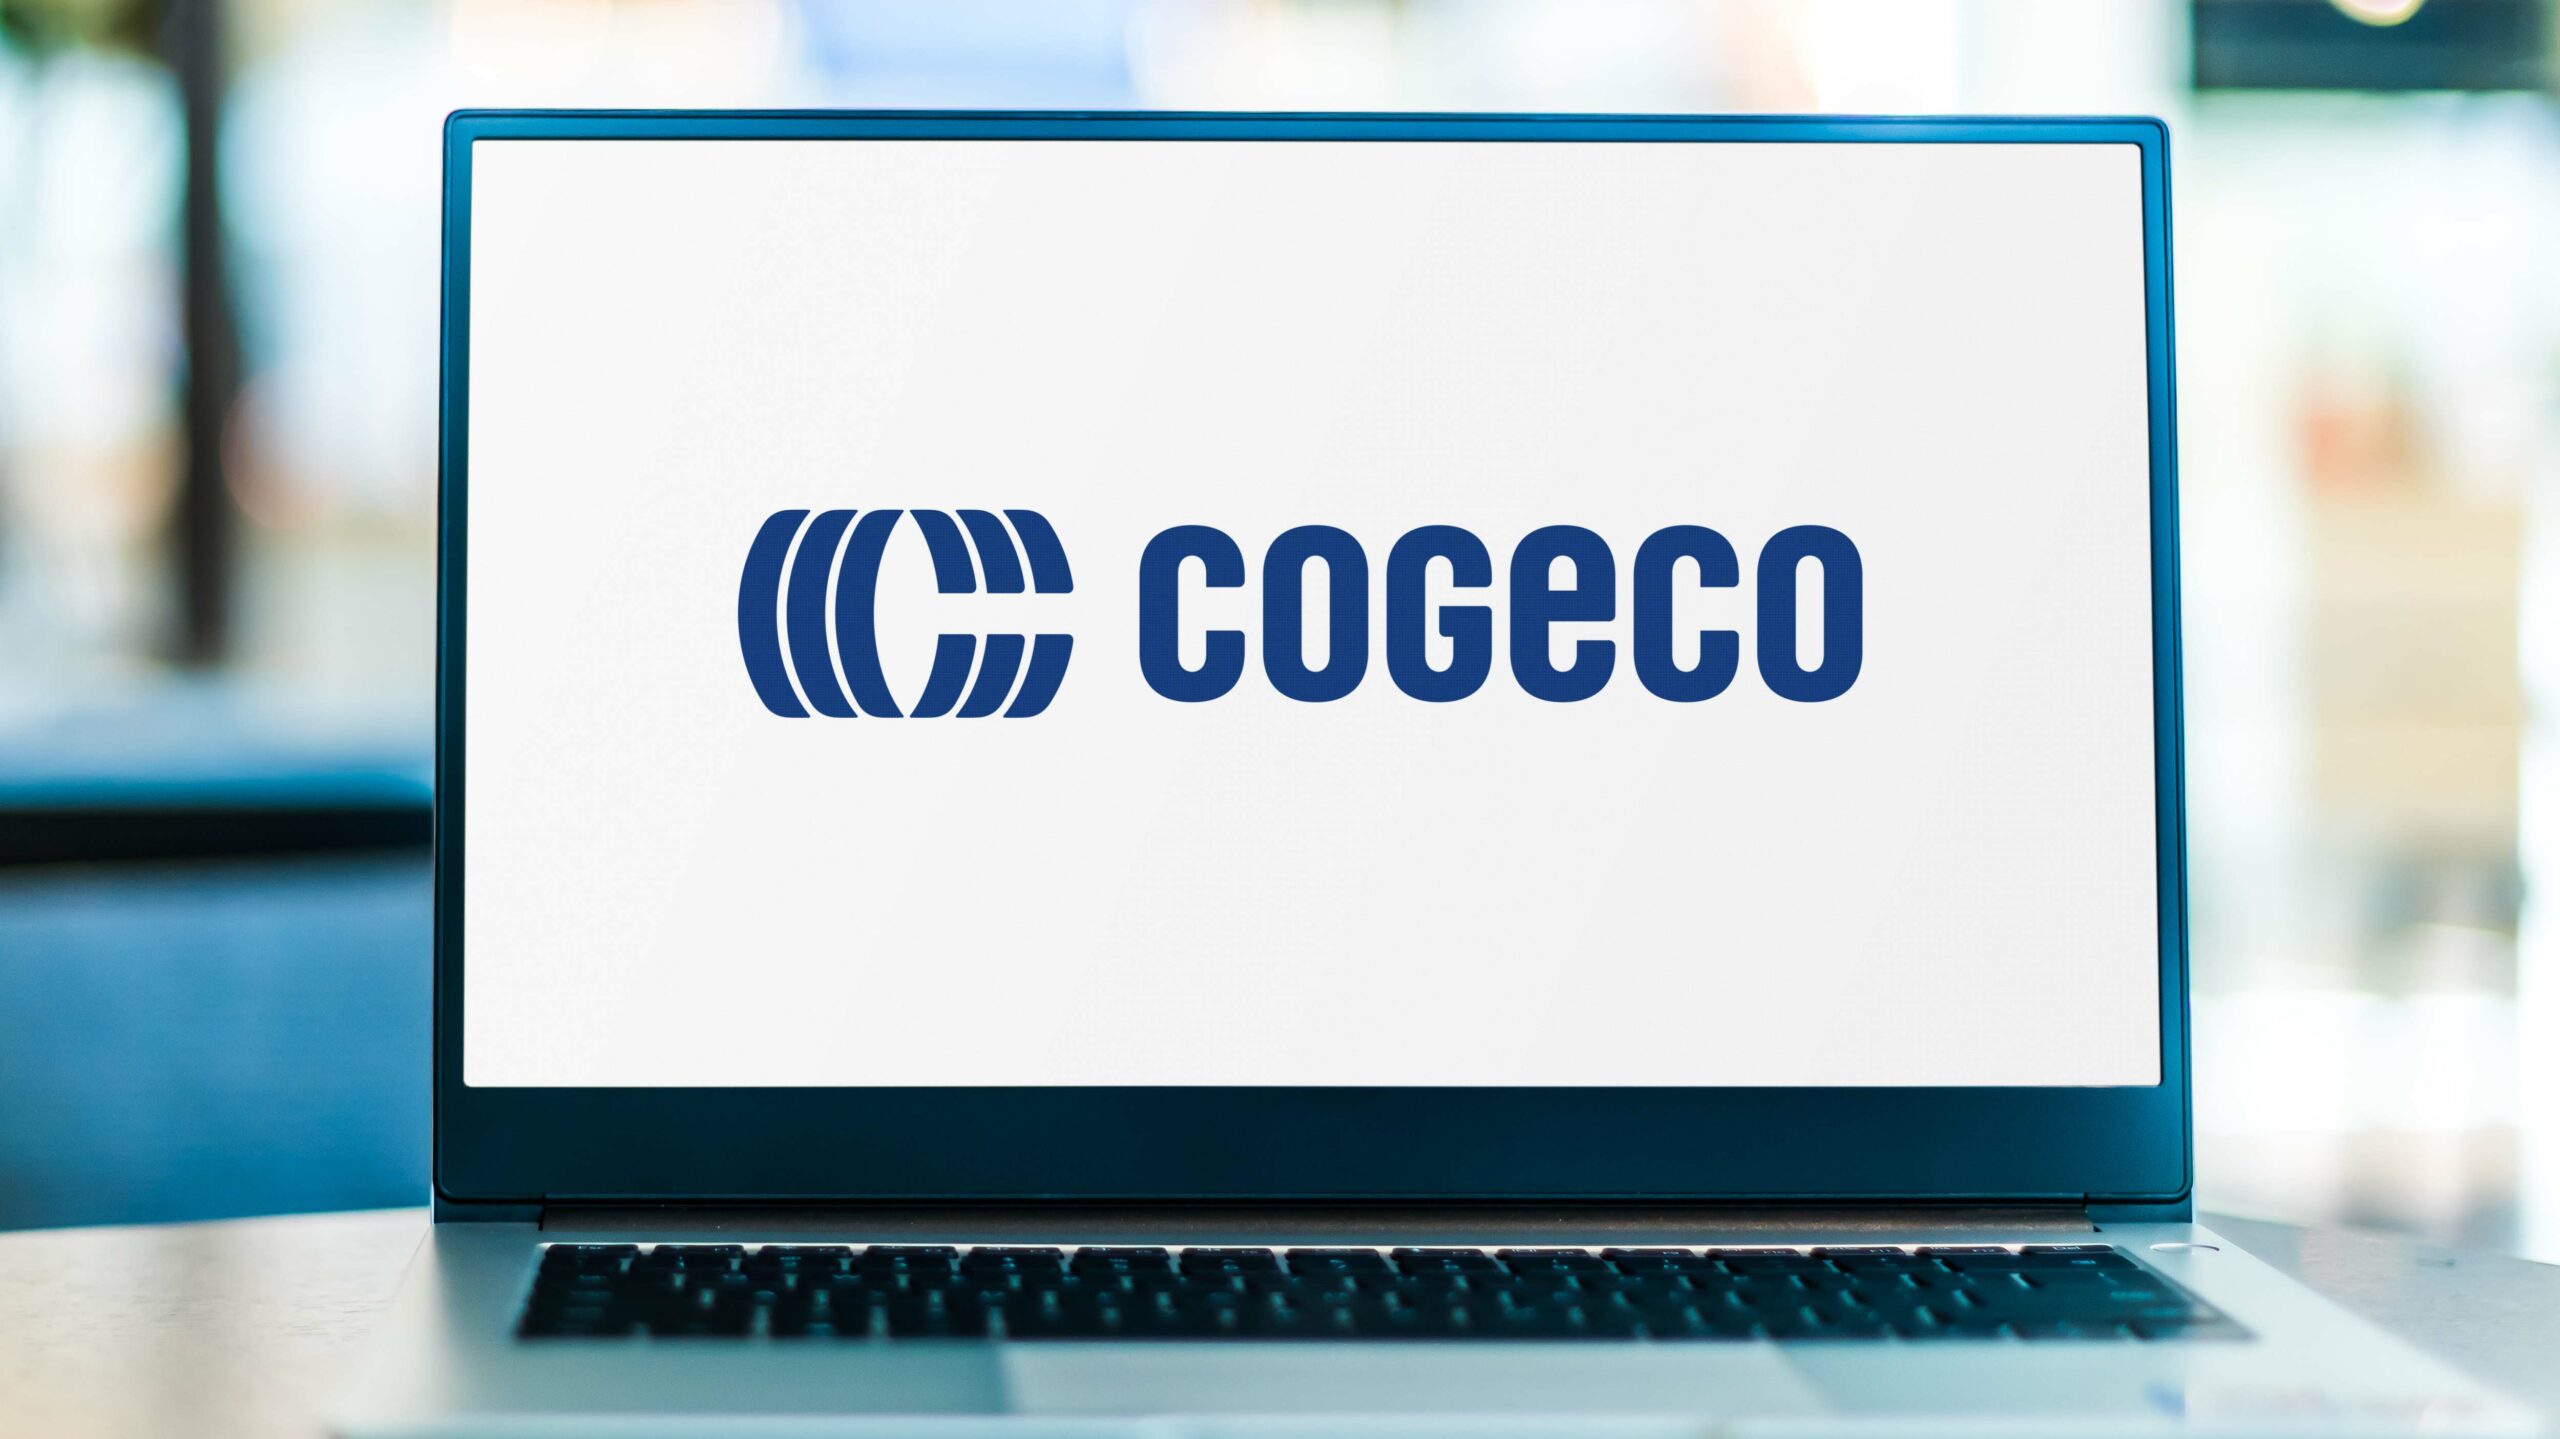 Cogeco brought fibre internet to 23,000 homes in Canada and the U.S. over Q4